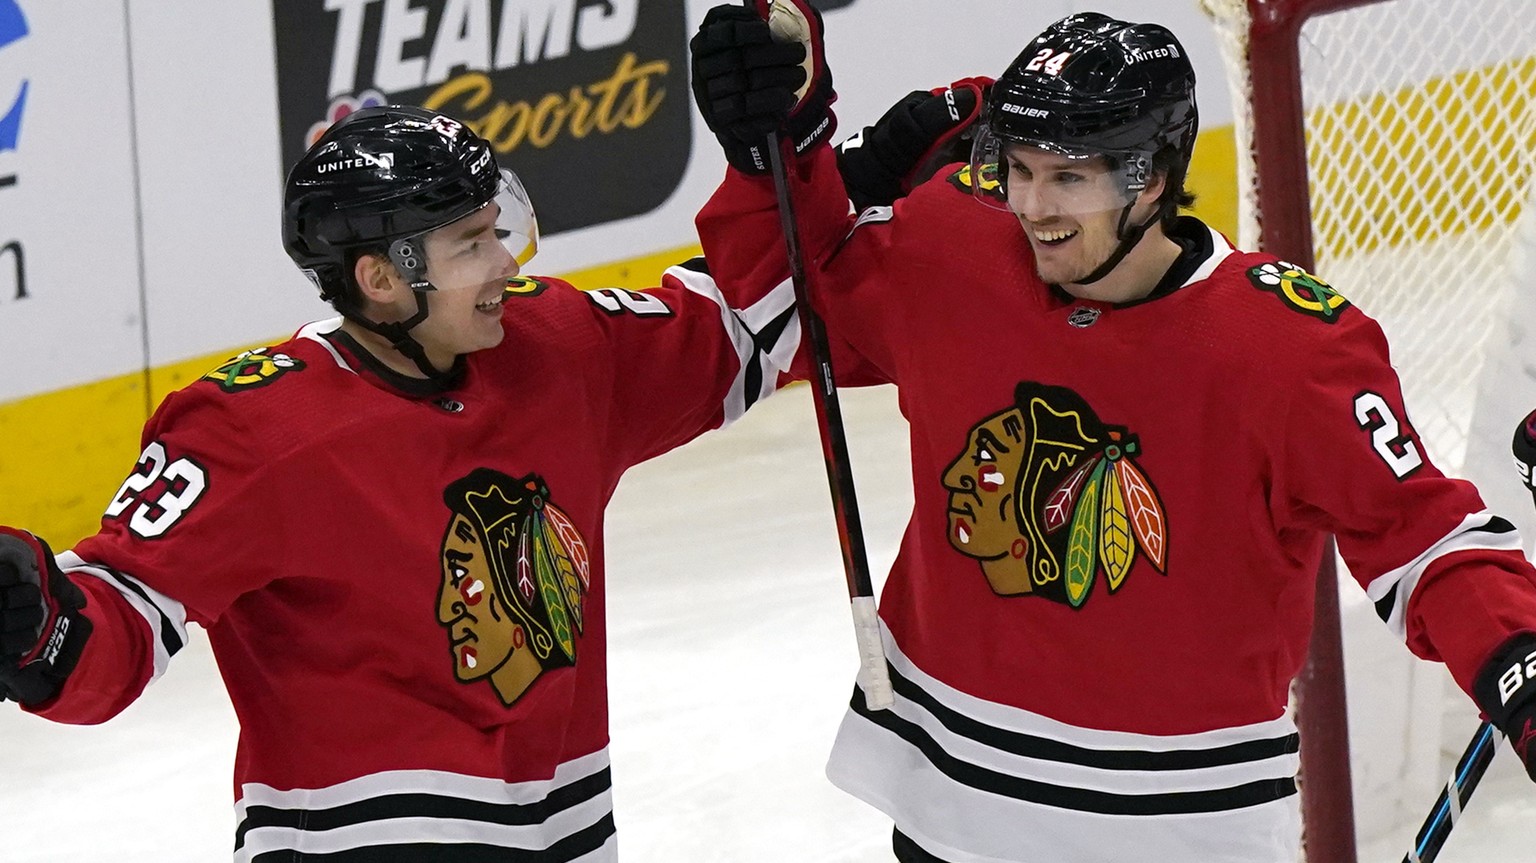 Chicago Blackhawks center Pius Suter, right, celebrates with left-wing Philipp Kurashev after scoring his second goal against the Detroit Red Wings during the first period of an NHL hockey game in Chi ...